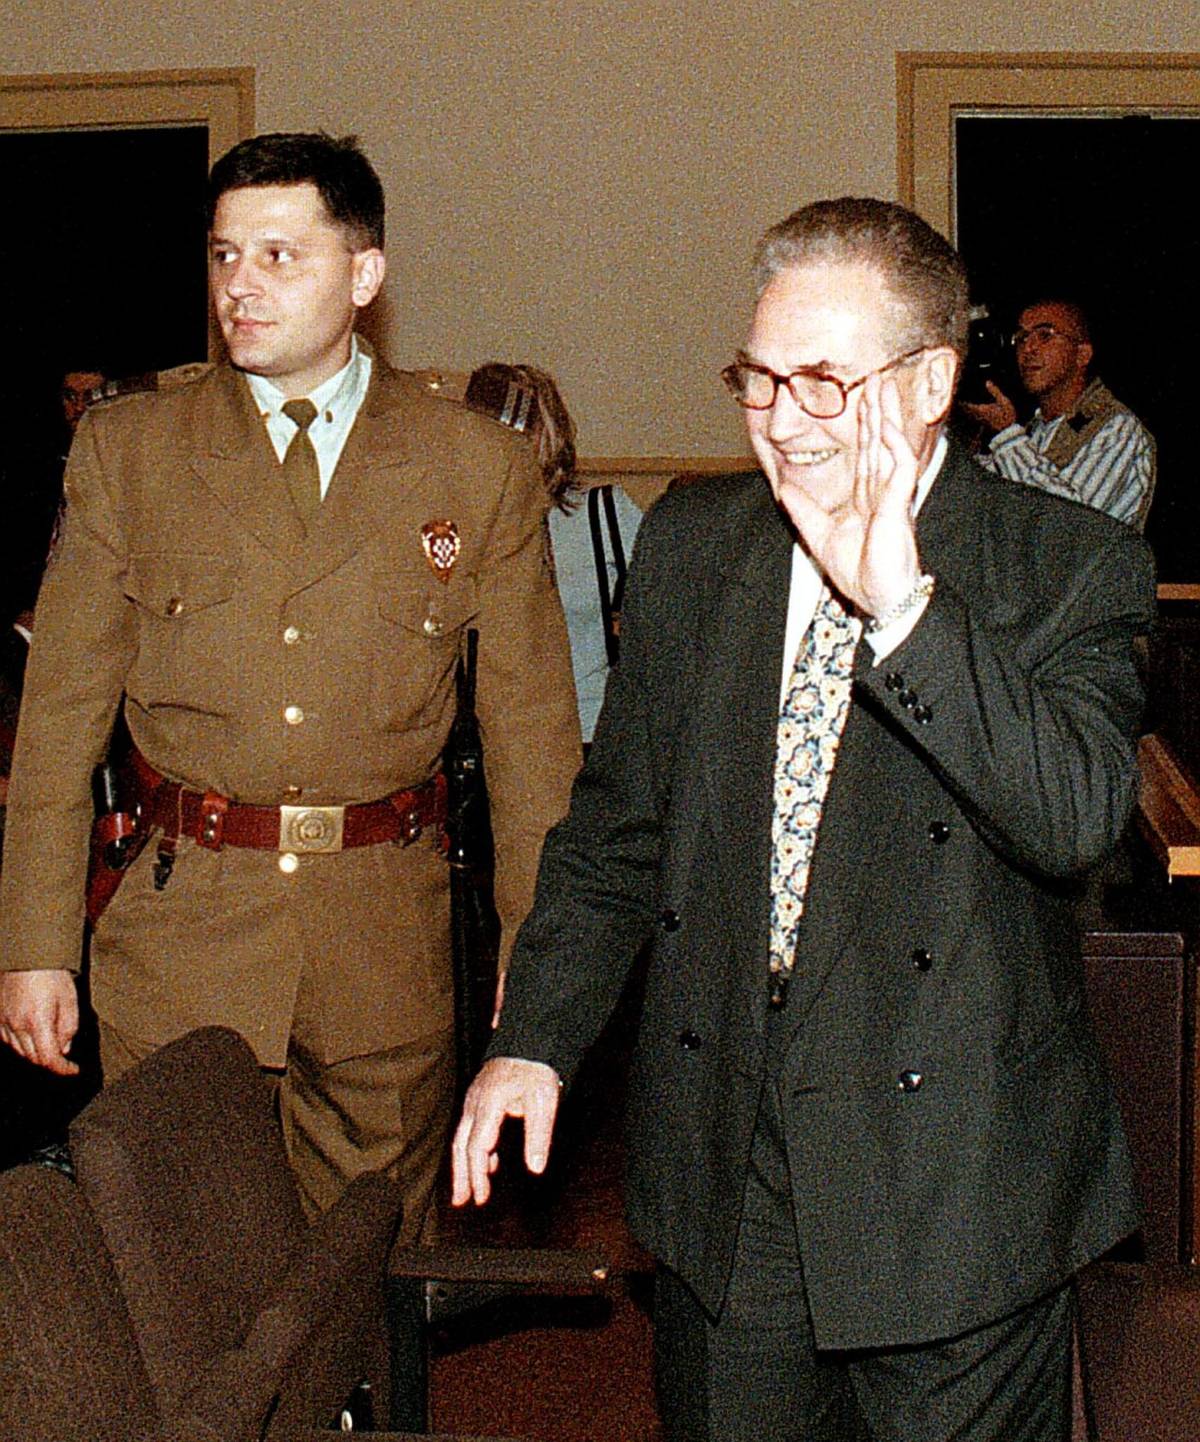 Dinko Šakić, former commander of the Jasenovac concentration camp during the World War II regime, during his trial in Zagreb, Croatia, 1999